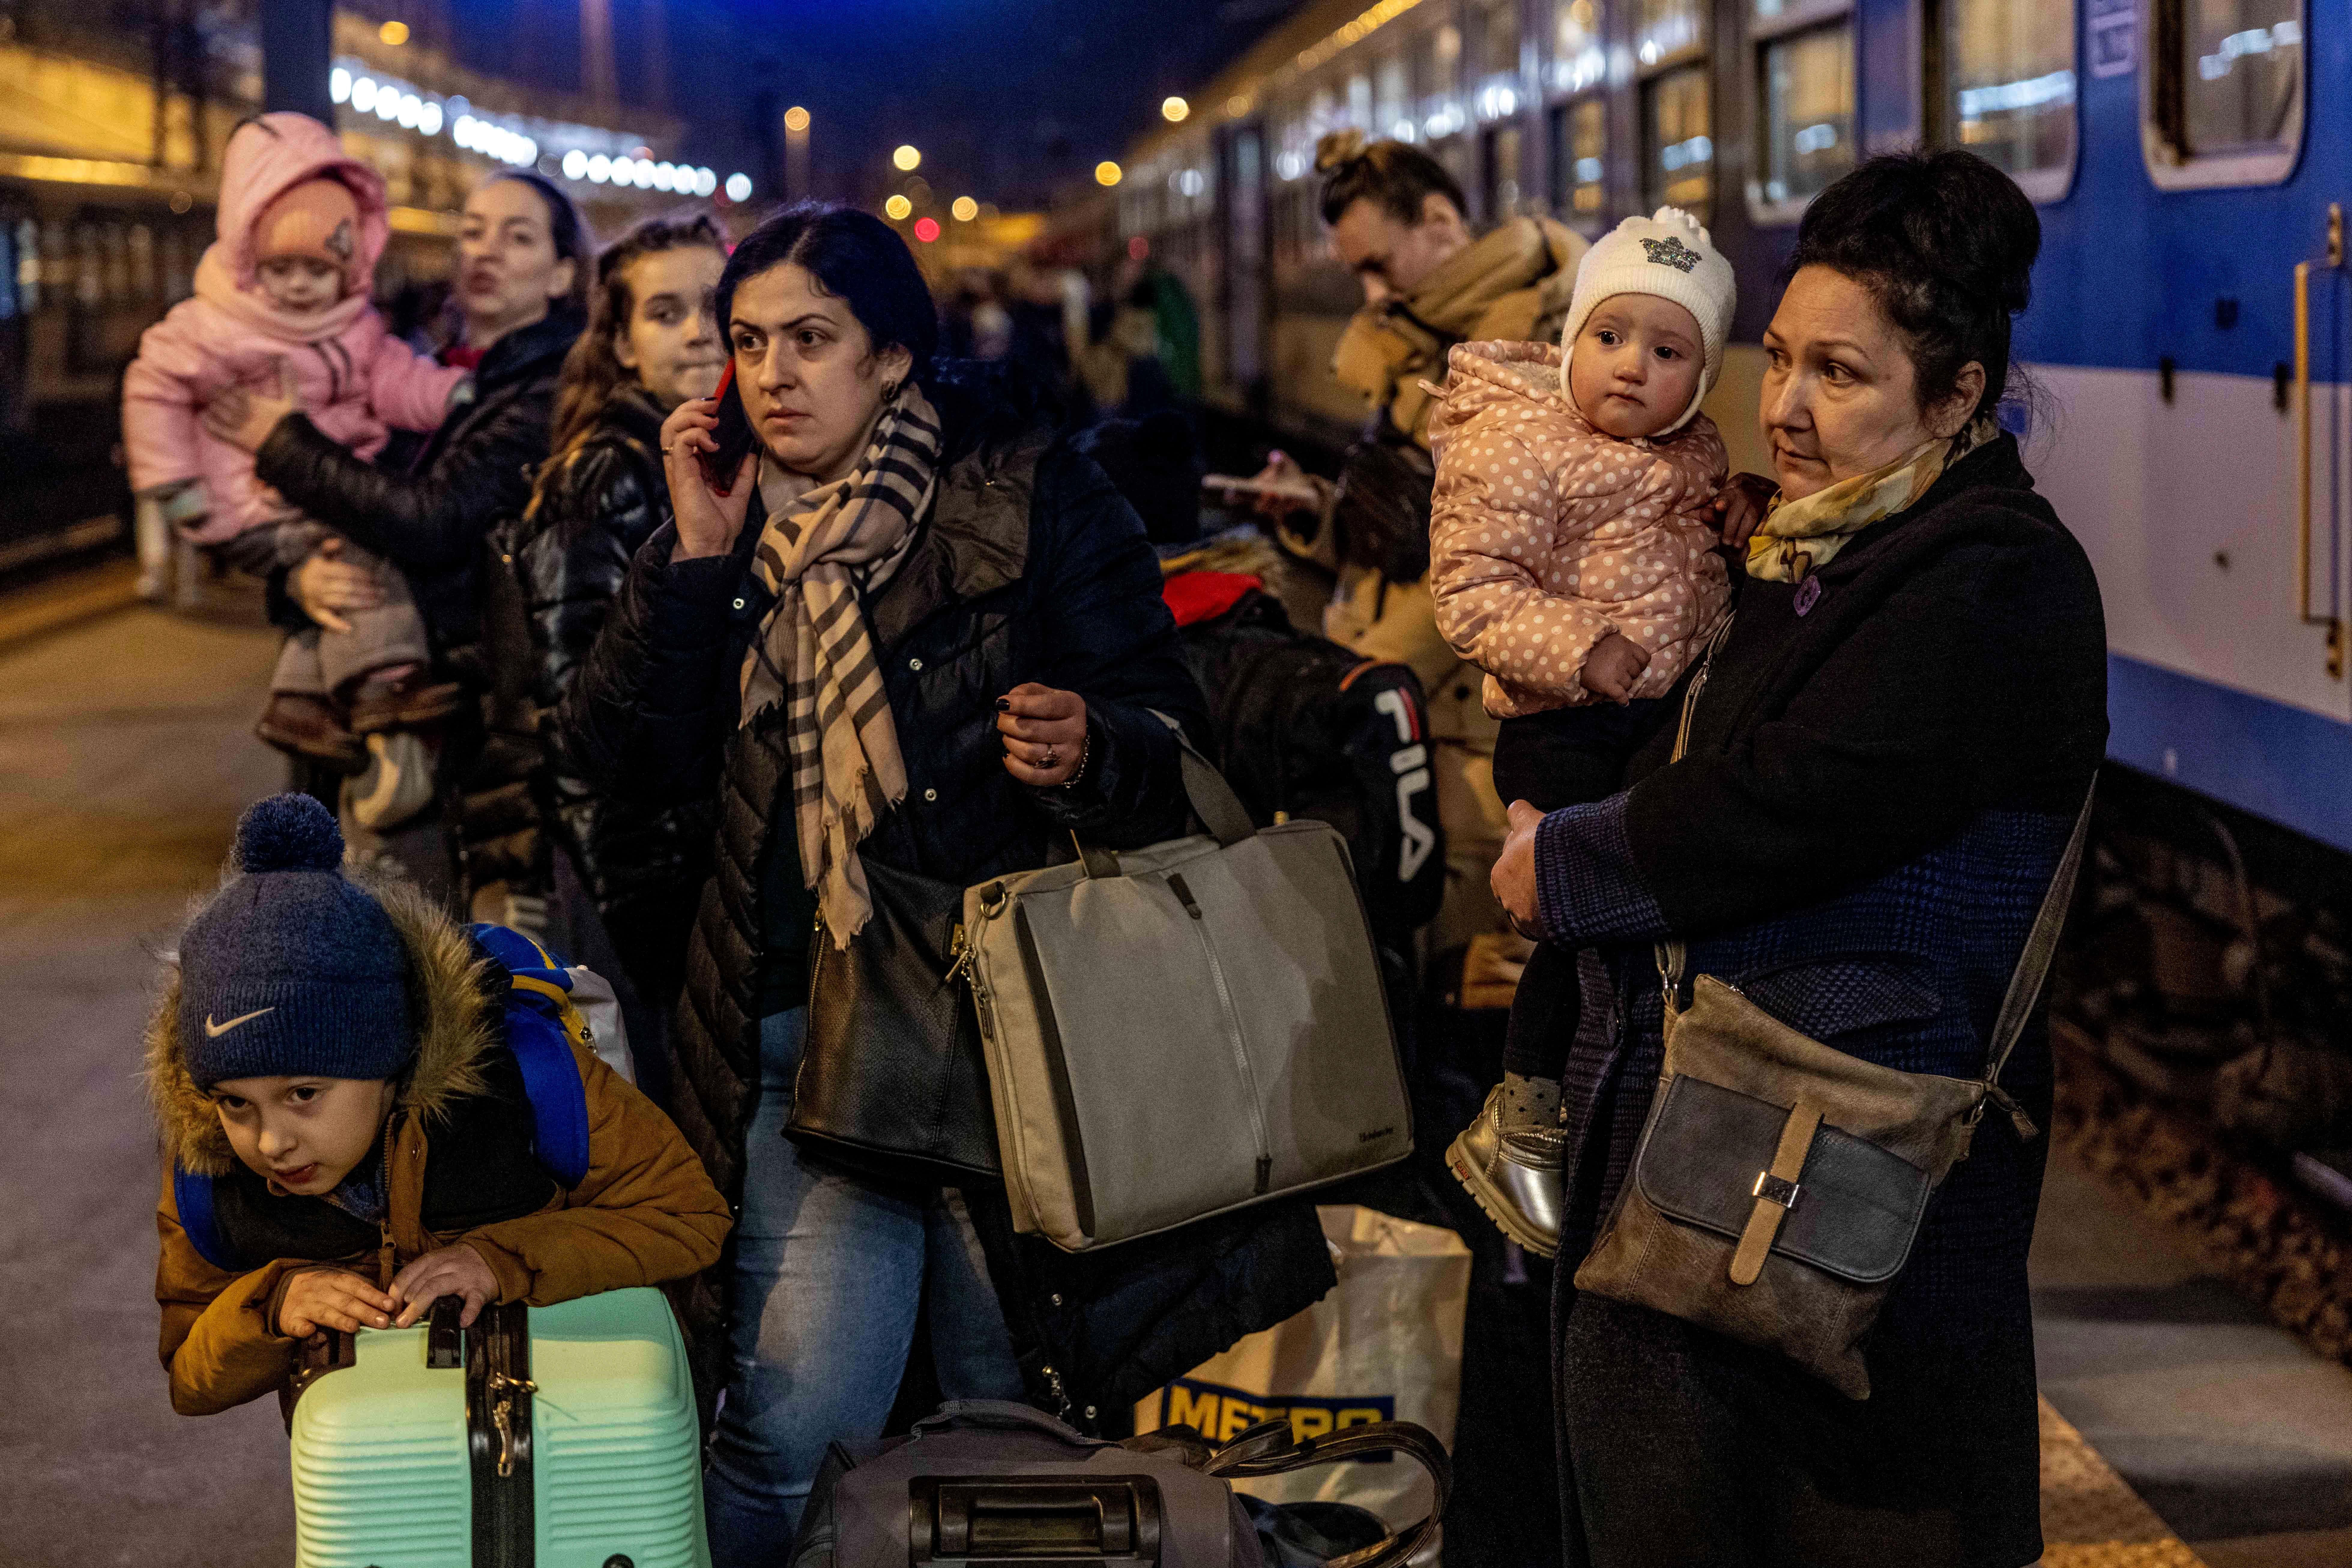 A group of people with kids and luggage walk on a train platform at night